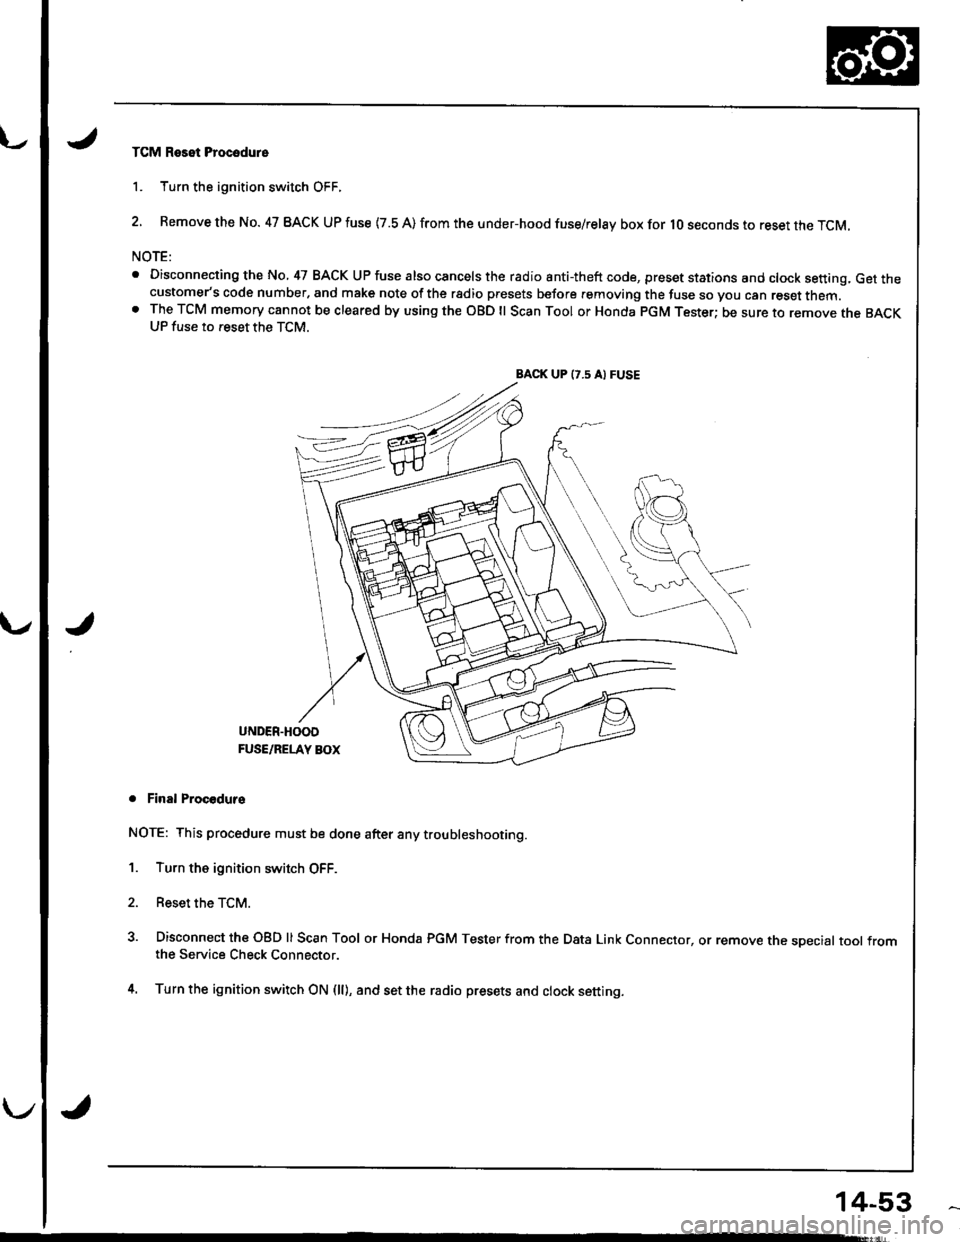 ACURA INTEGRA 1998  Service Repair Manual TCM Reset Procodure
1. Turn the ignition switch OFF.
2. Remove the No. 47 BACK UP fuse {7.8 A) from the under-hood fuse/relay box for lO seconds to reset the TCM.
NOTE:
. Disconnecting the No, 47 BACK